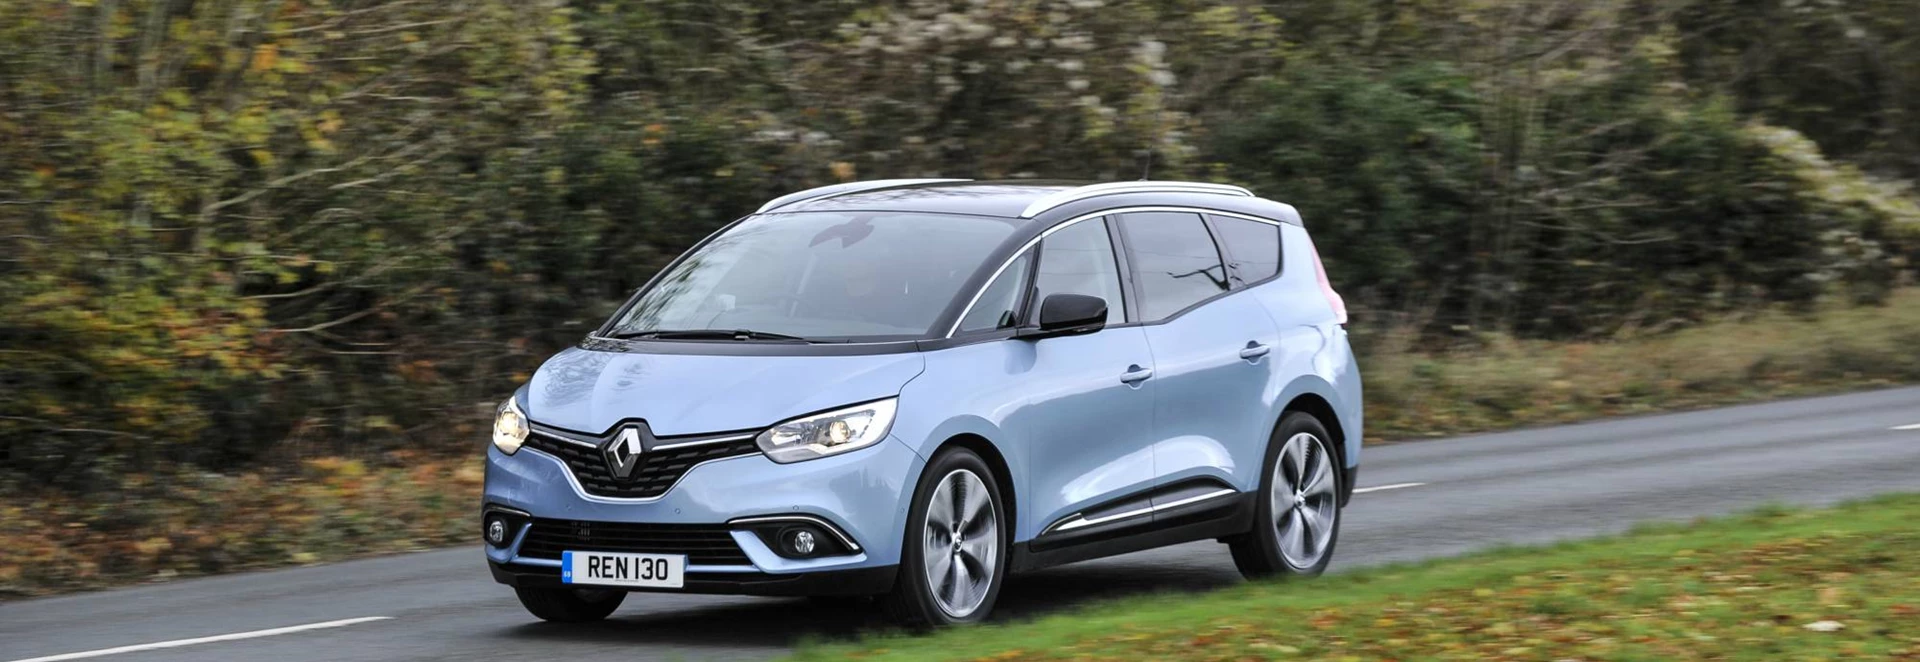 Renault Grand Scenic Dynamique S Nav dCi 130 MPV review 